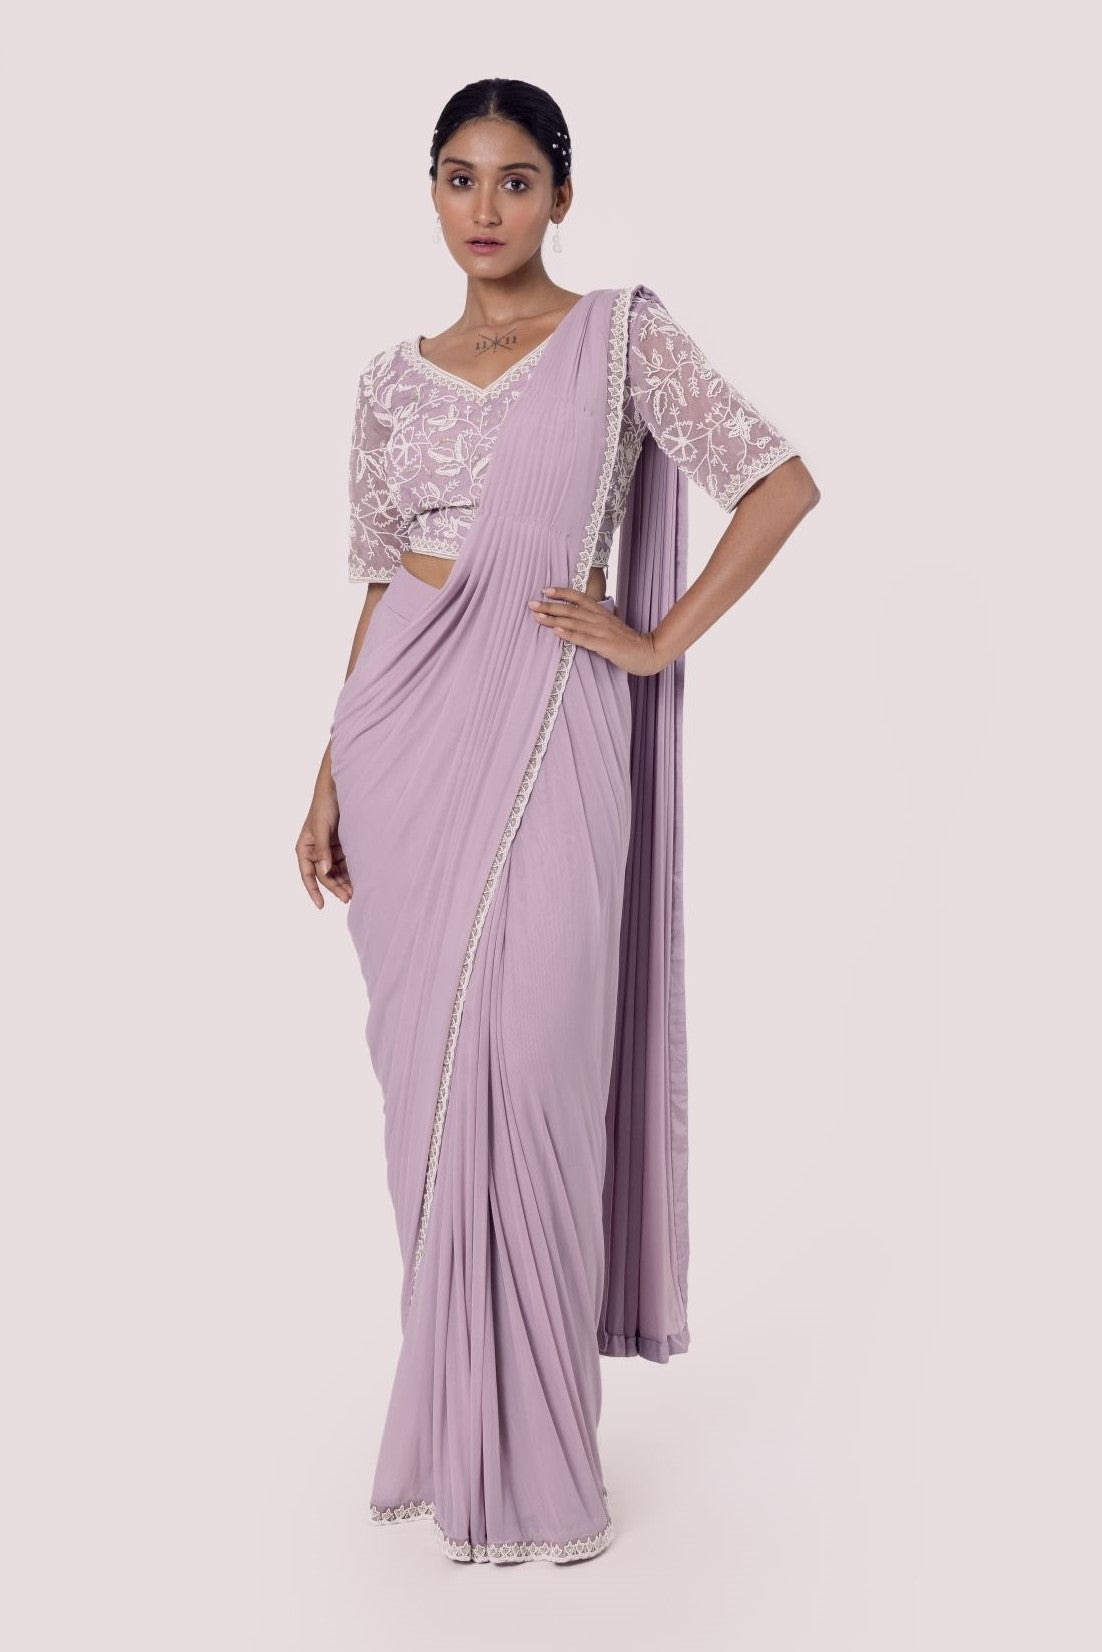 Shop lavender drape saree with embroidered blouse. Make a fashion statement on festive occasions and weddings with designer sarees, designer suits, Indian dresses, Anarkali suits, palazzo suits, designer gowns, sharara suits, and embroidered sarees from Pure Elegance Indian fashion store in the USA.